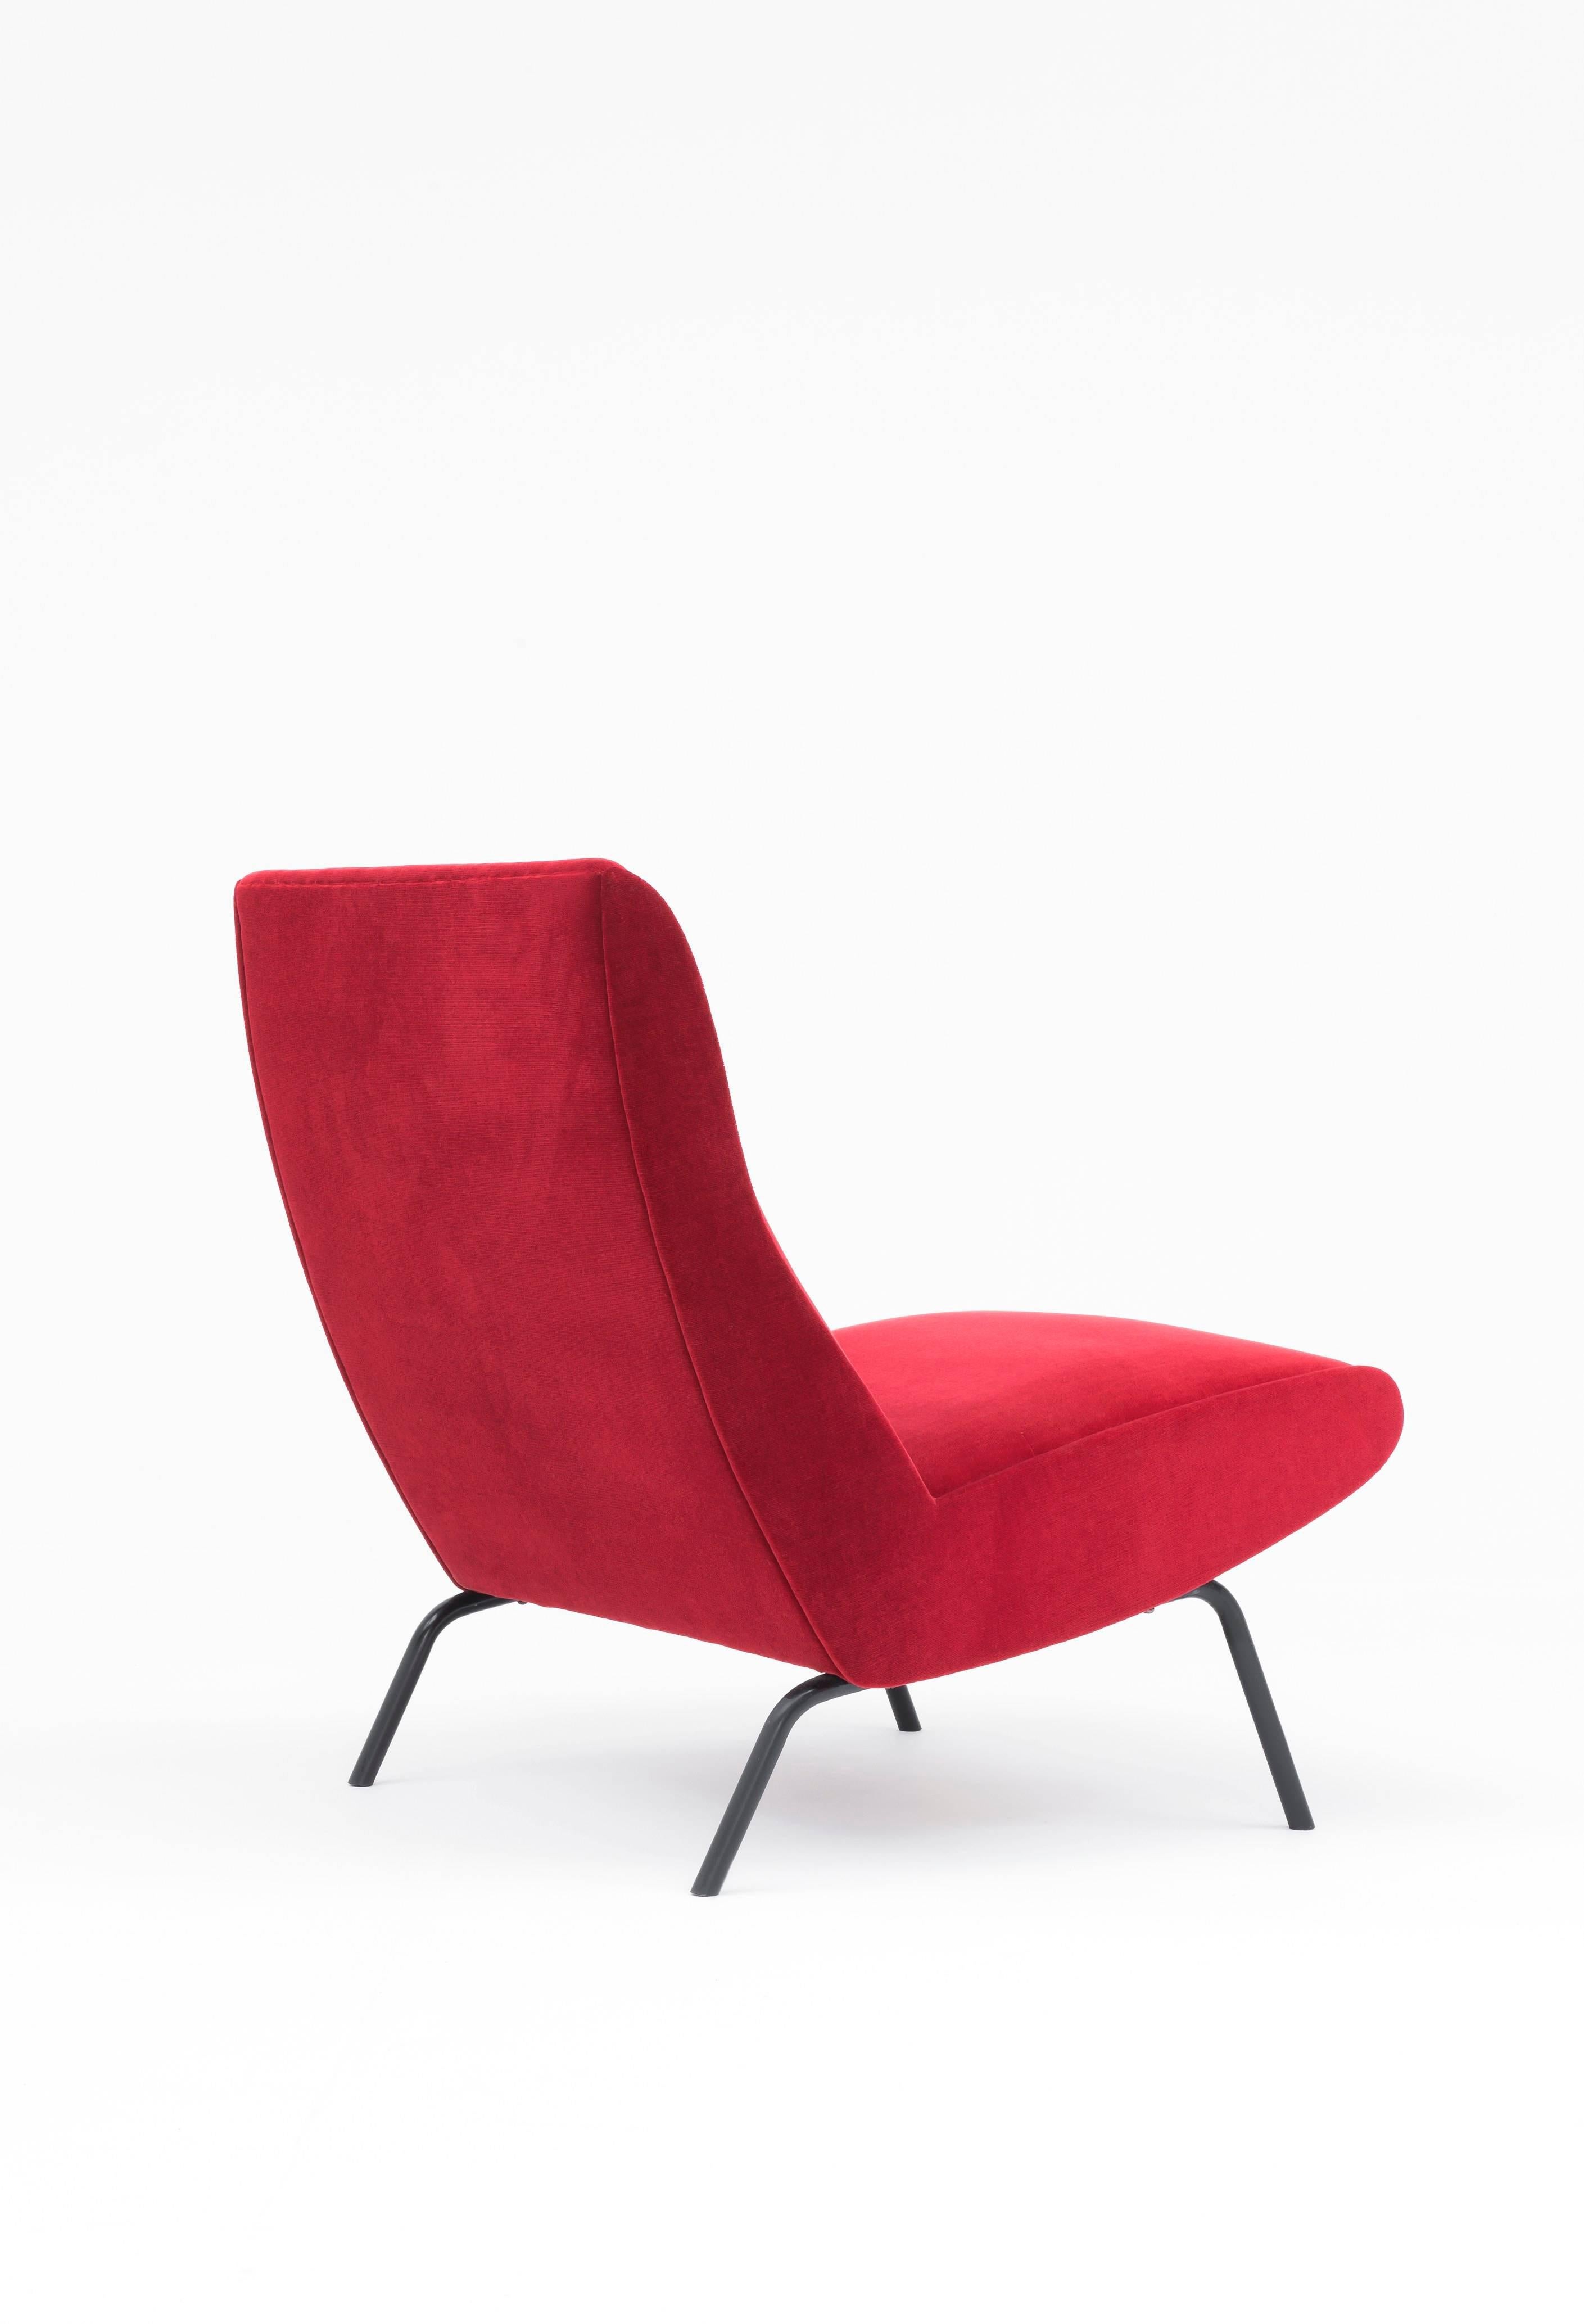 Lacquered Chair CM168 by Pierre Paulin - Thonet Edition, 1956 For Sale